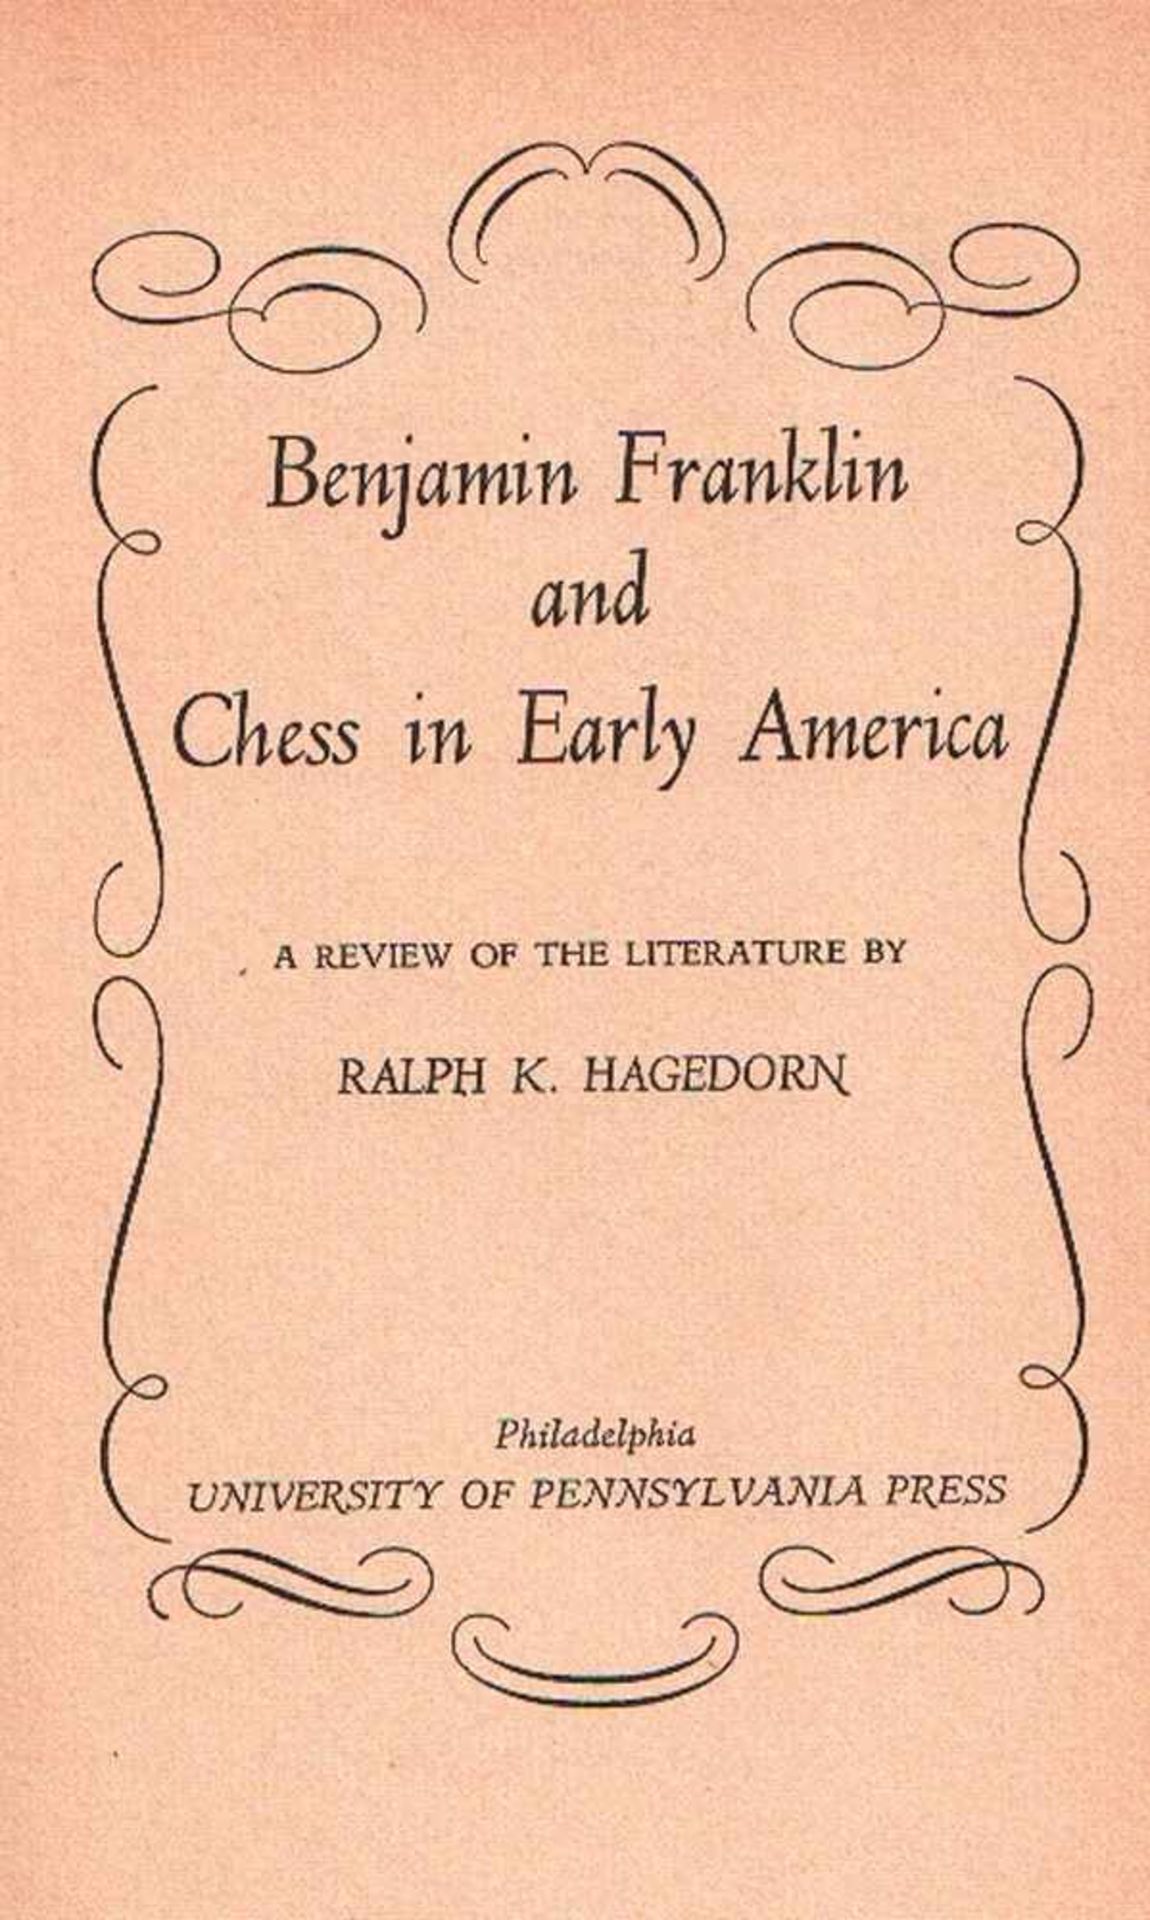 Hagedorn, Ralph K(arl). Benjamin Franklin and Chess in Early America. A Review of the Literature.